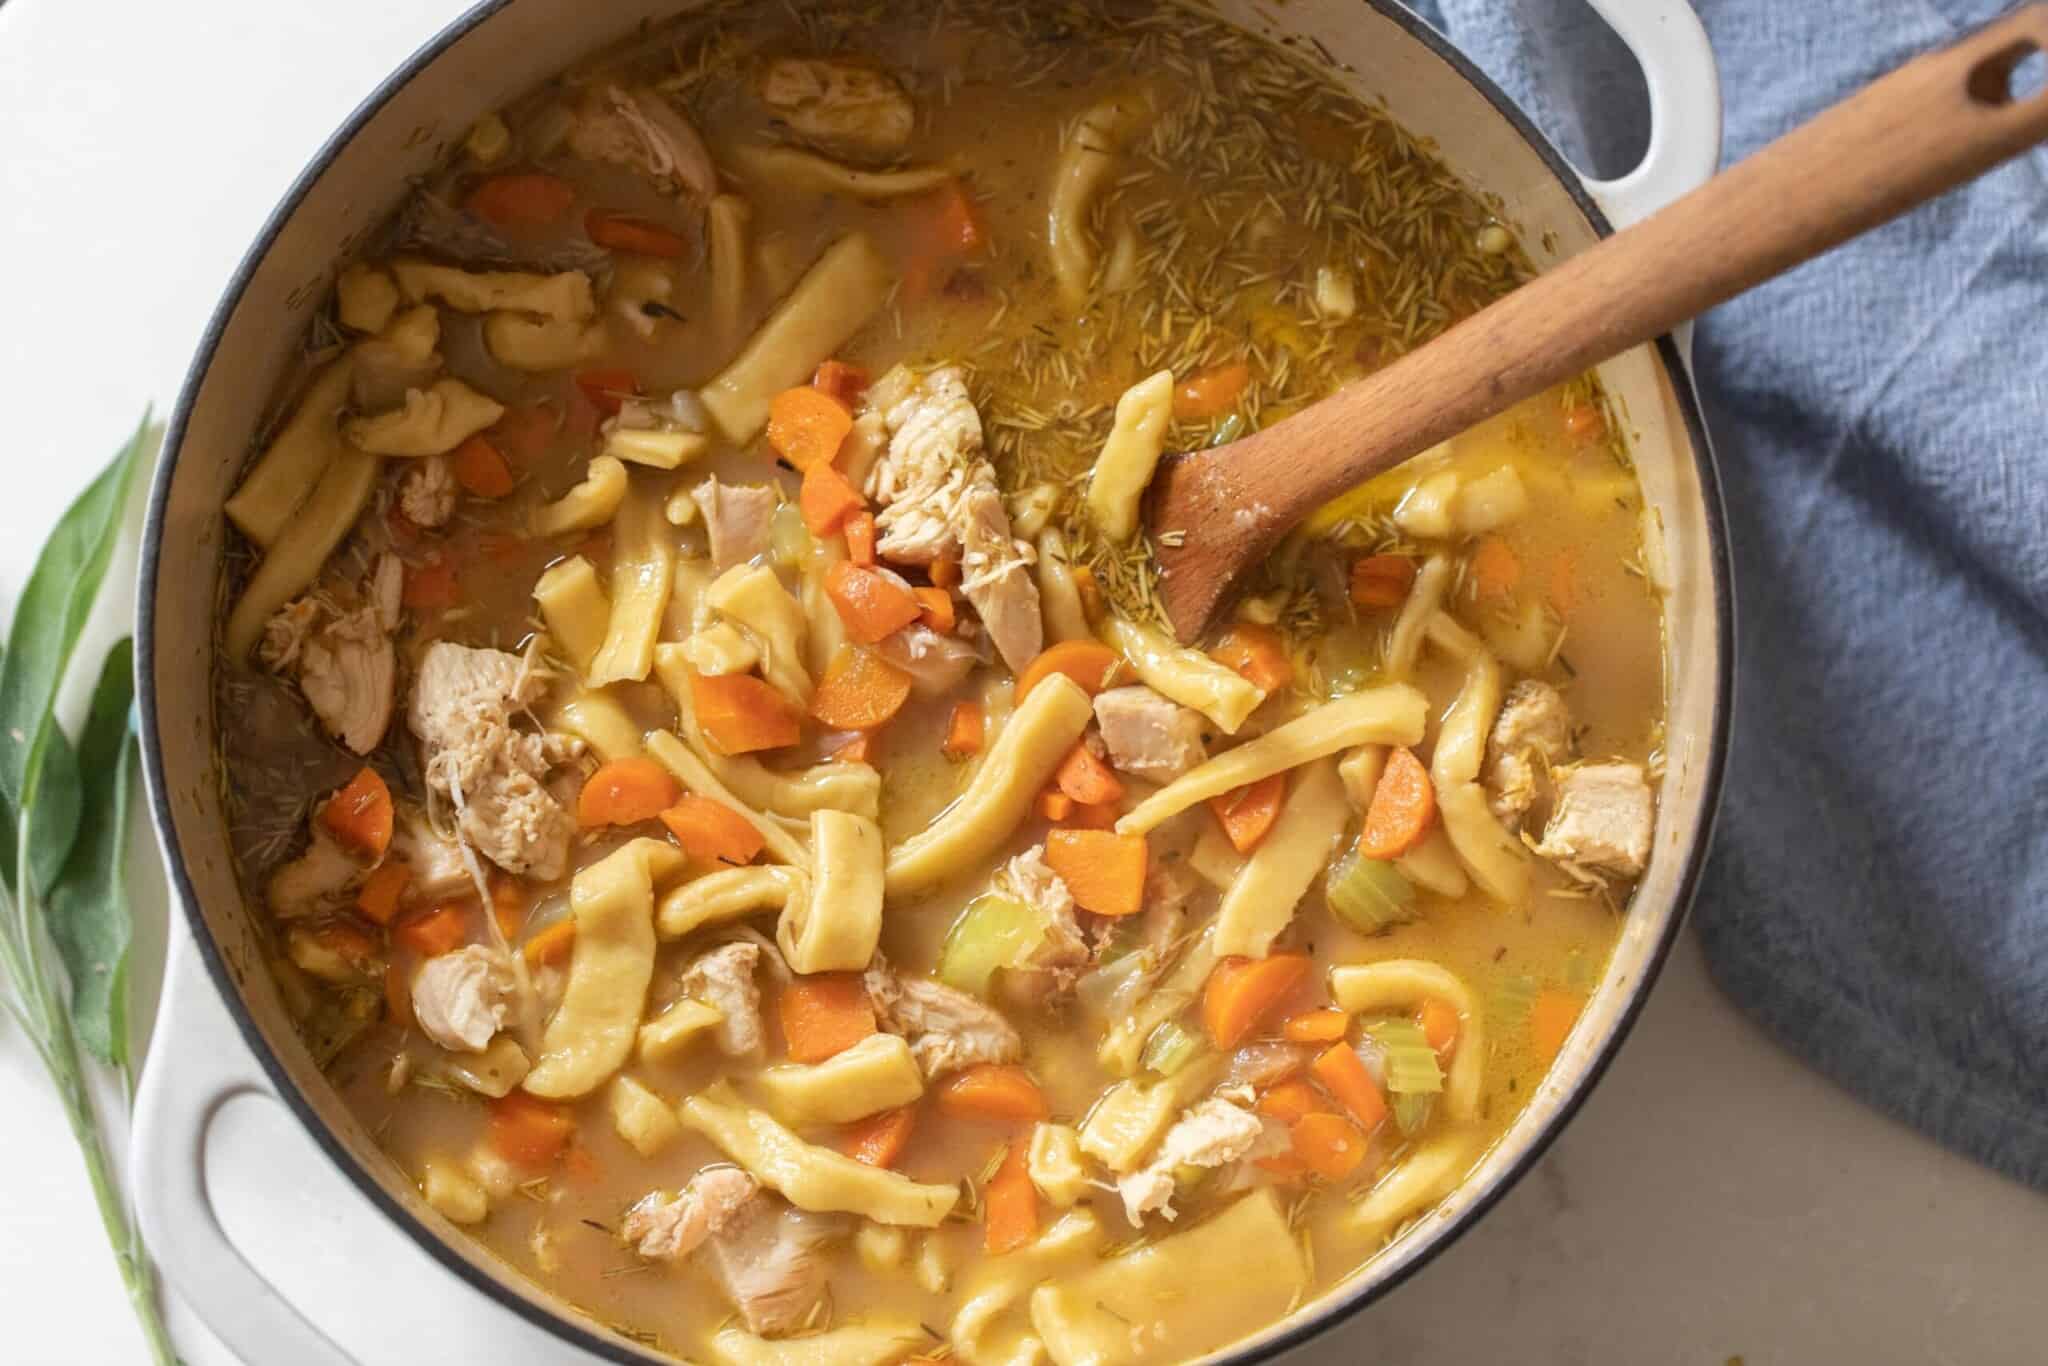 Homestyle Chicken Noodle Soup Recipe From Scratch - Farmhouse on Boone